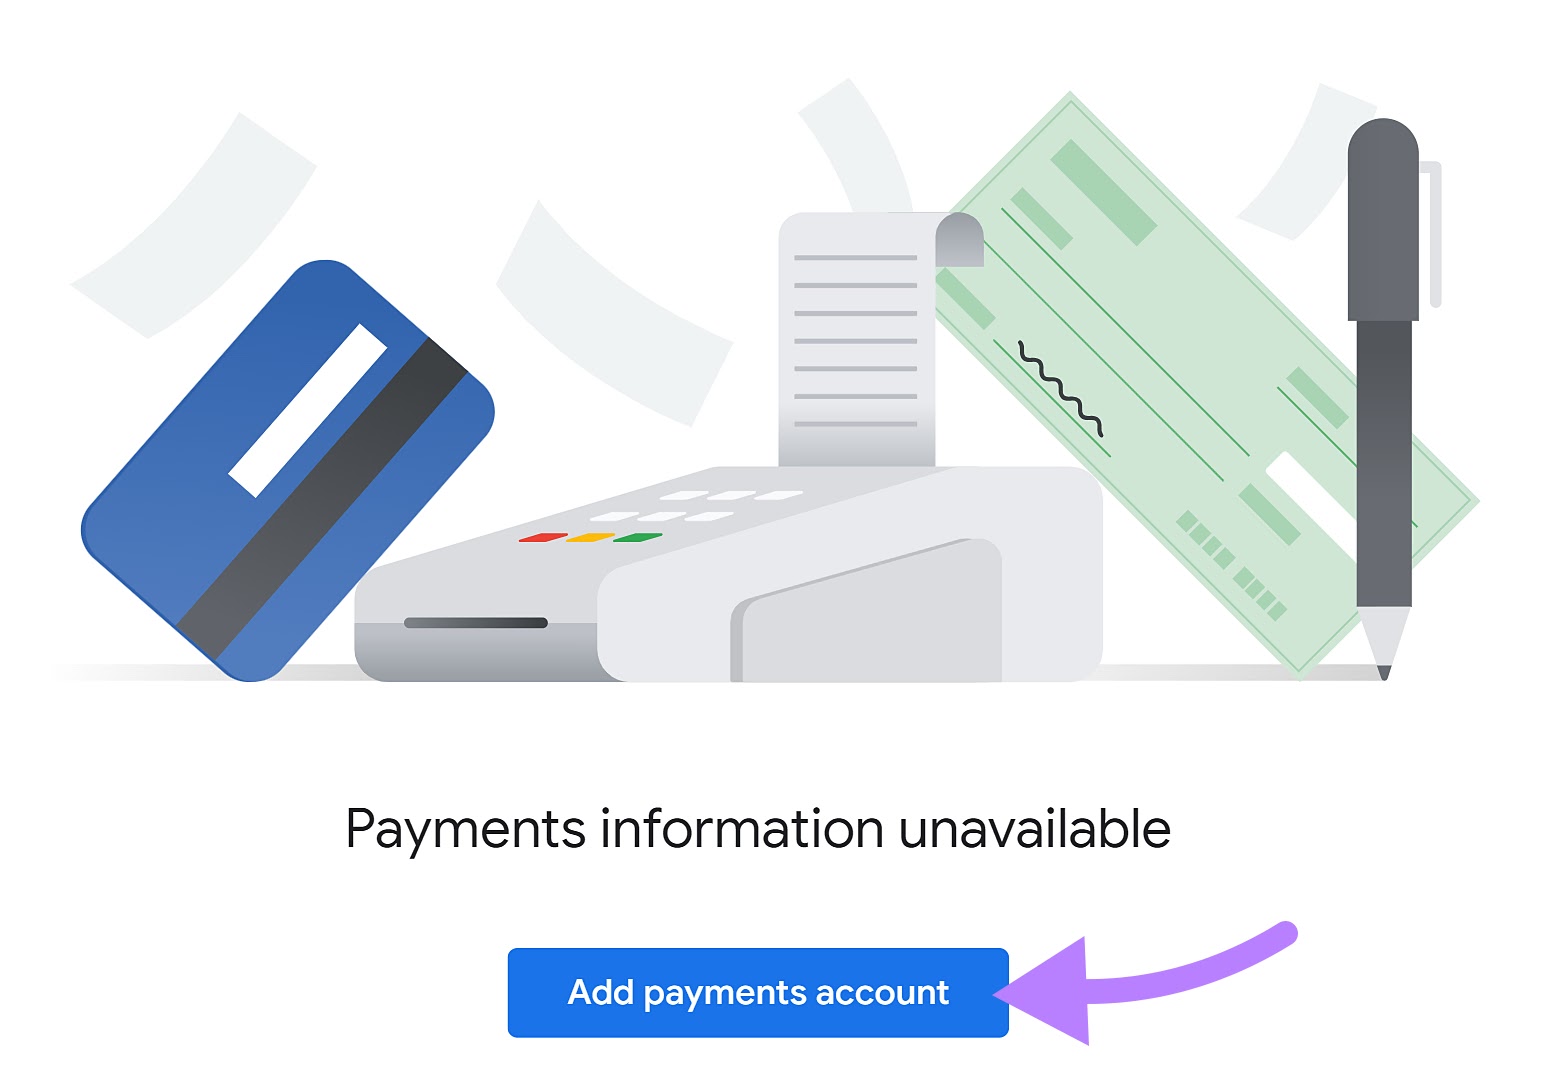 "Add payments account" button